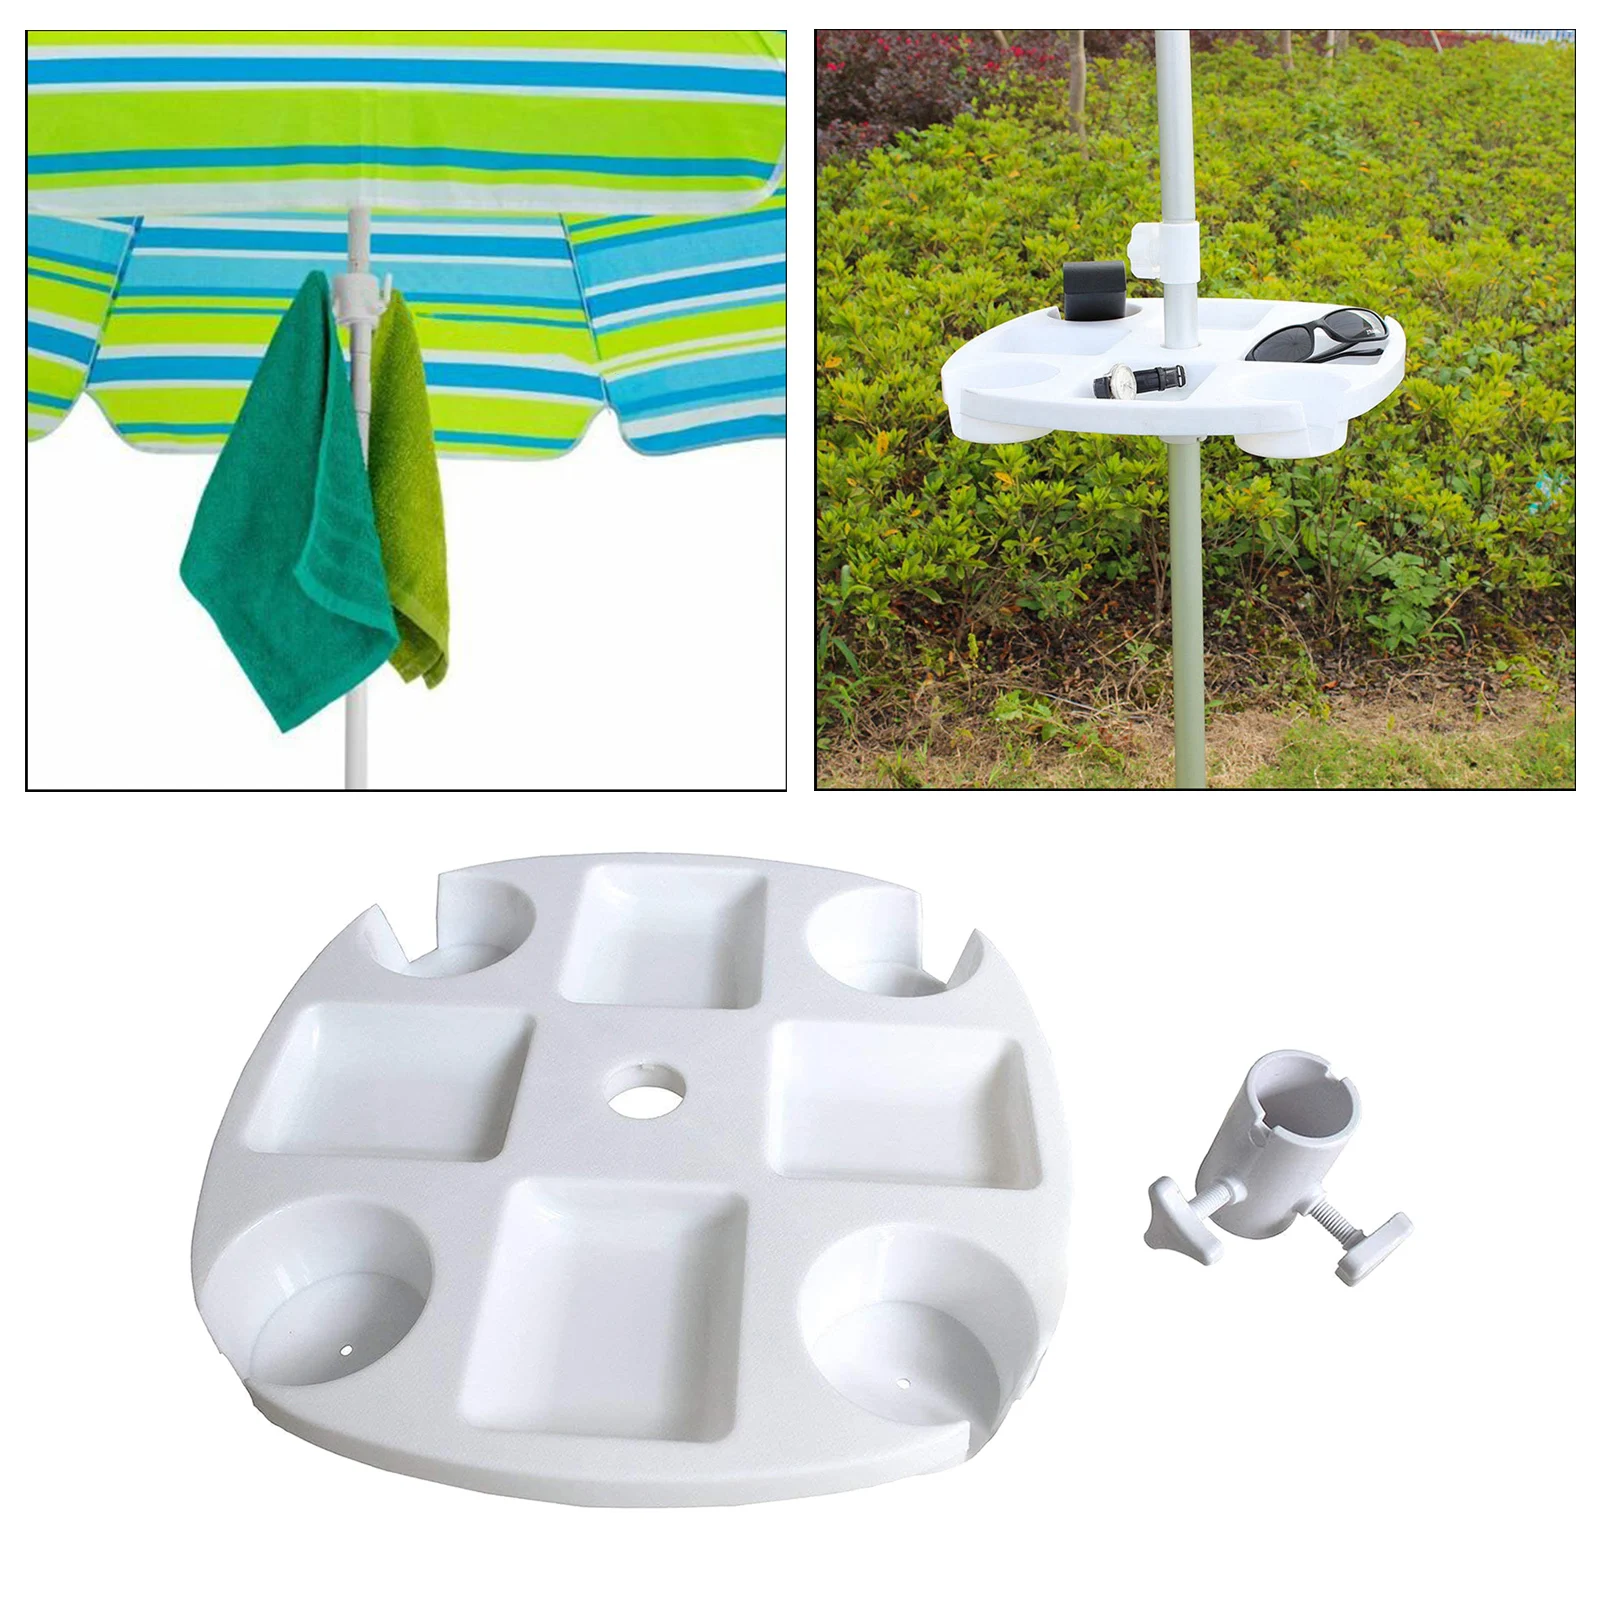 Outdoor Beach Umbrella Table Tray Snack Drink Holder with Towl Hats Hanging Hook for Beach Patio Garden White